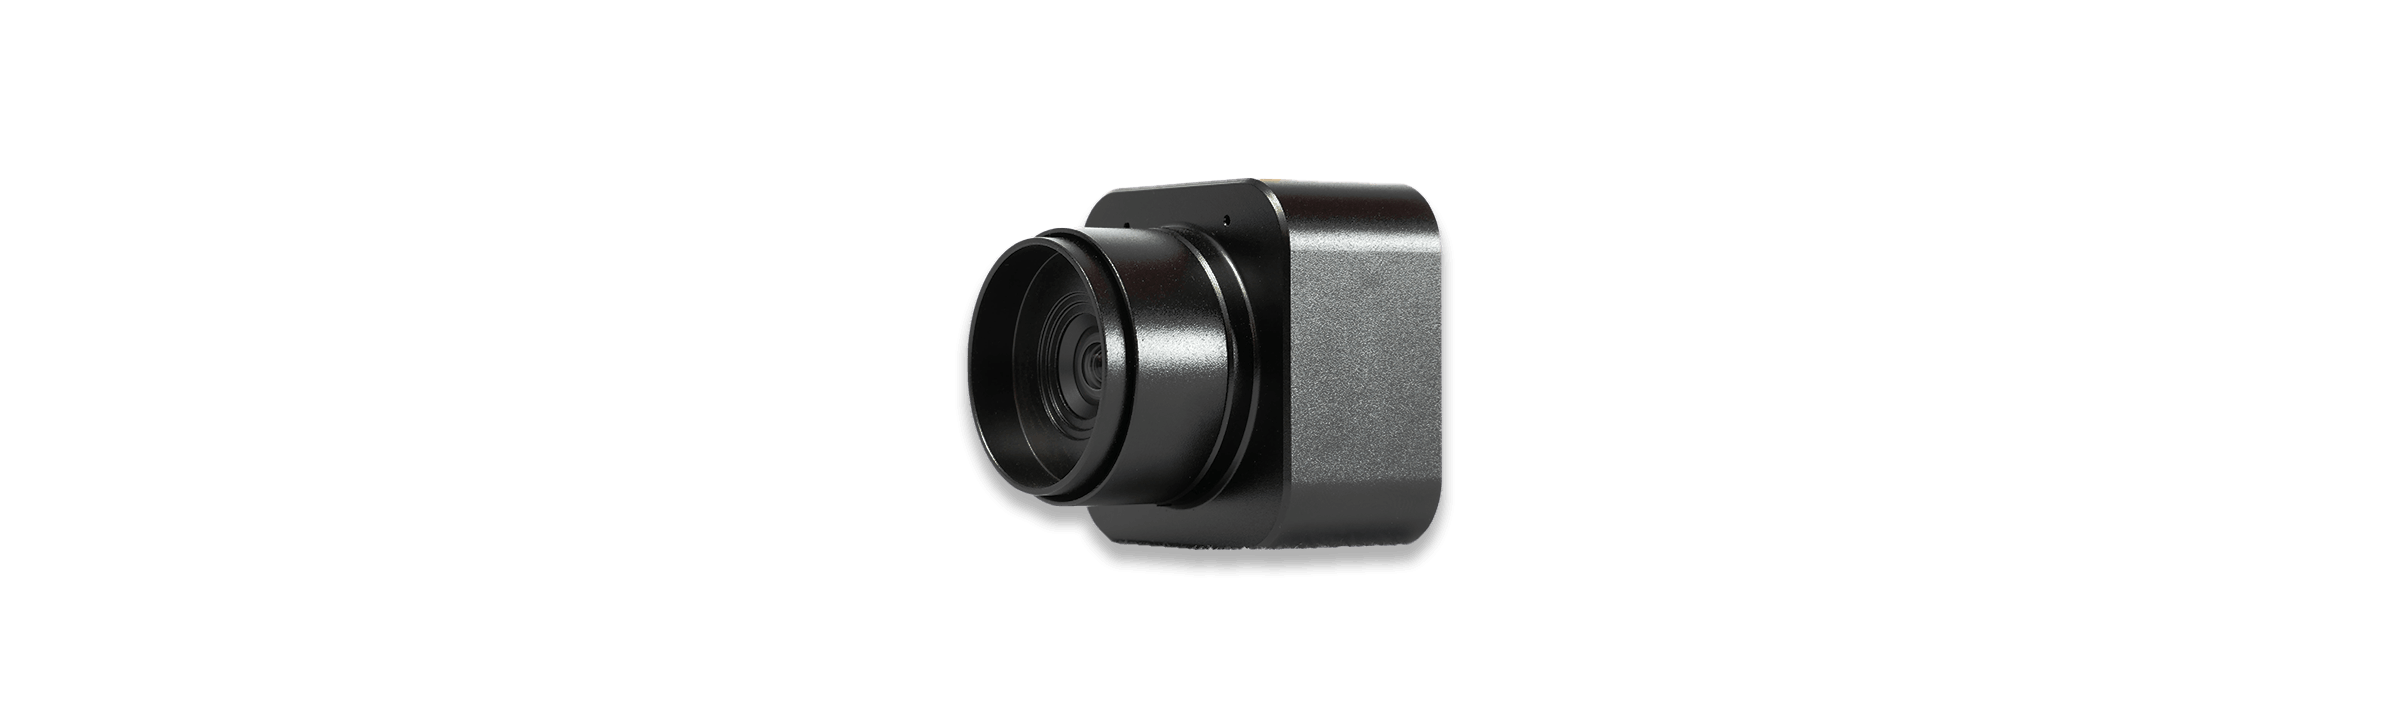 BlackCam 2.5mm camera for BlackBox with no background